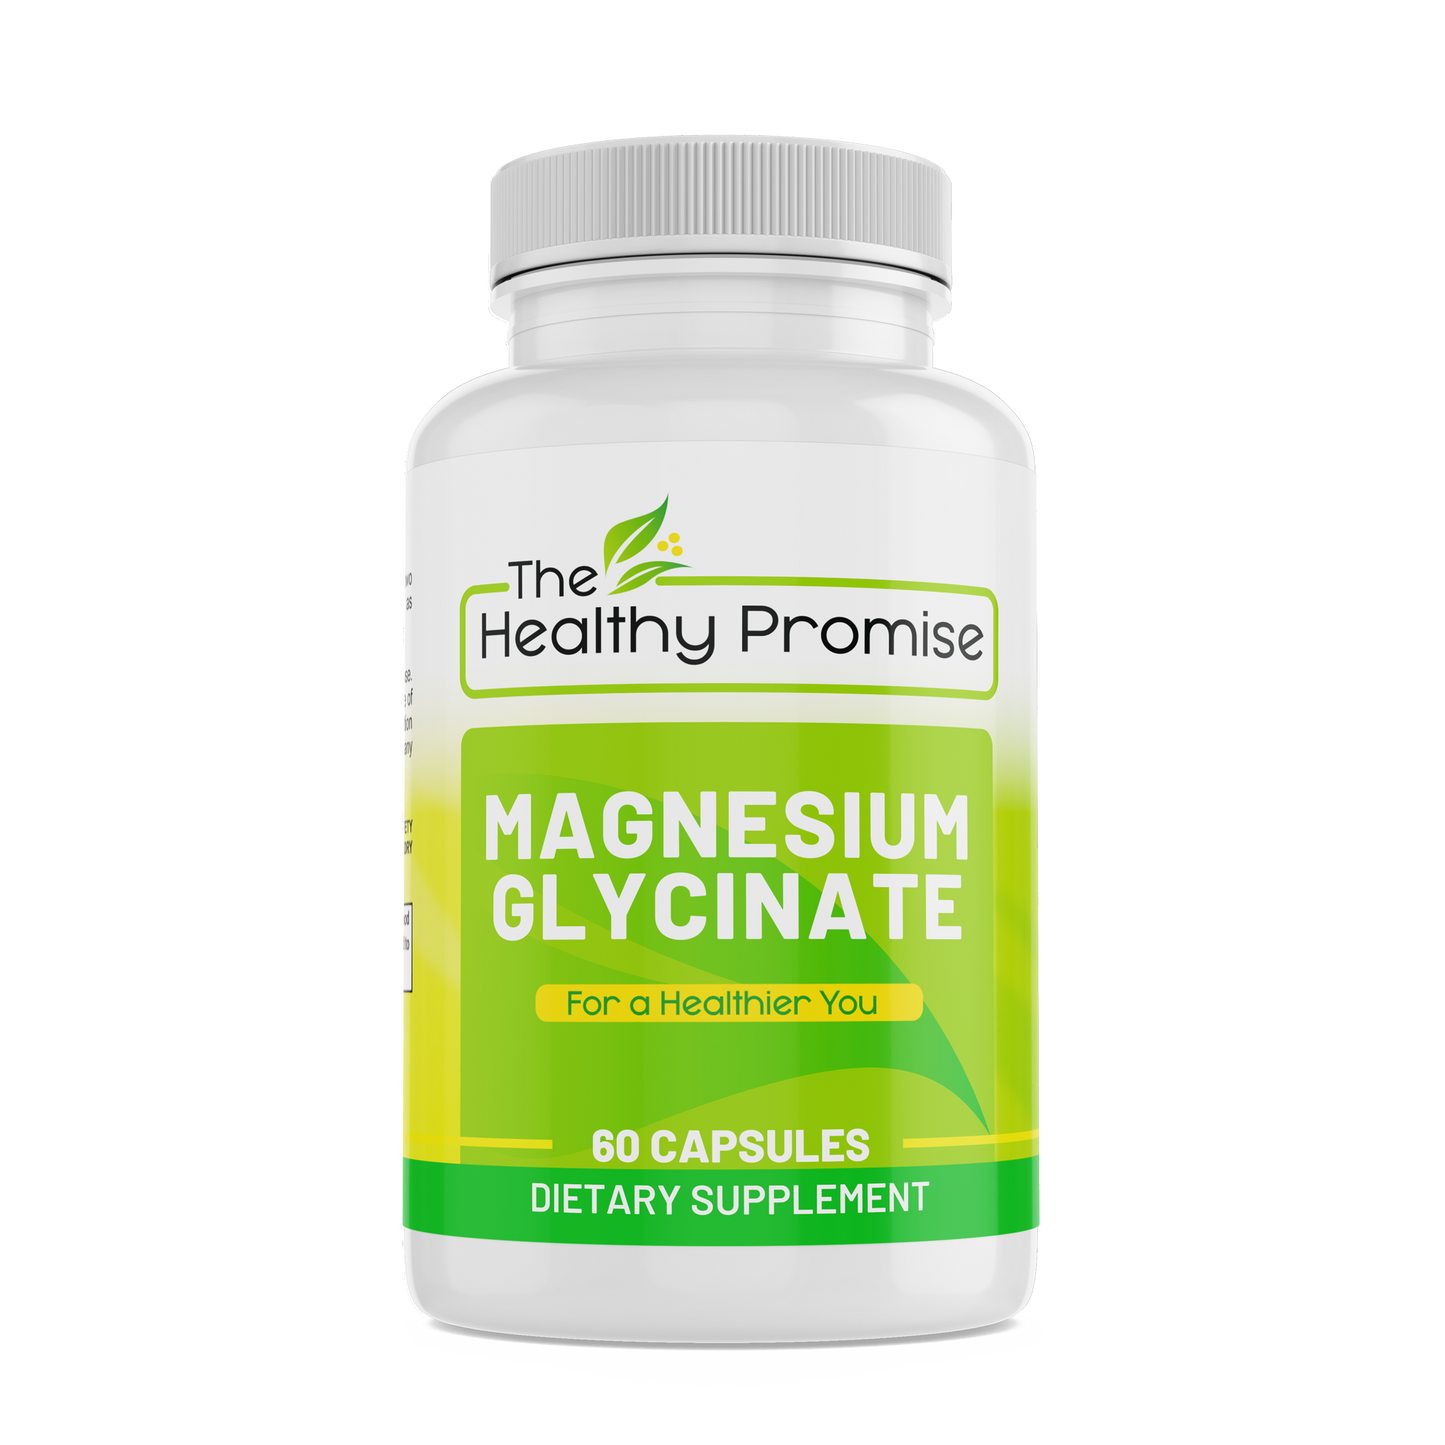 the healthy promise magnesium glycinate vitamin supplement bottle front view